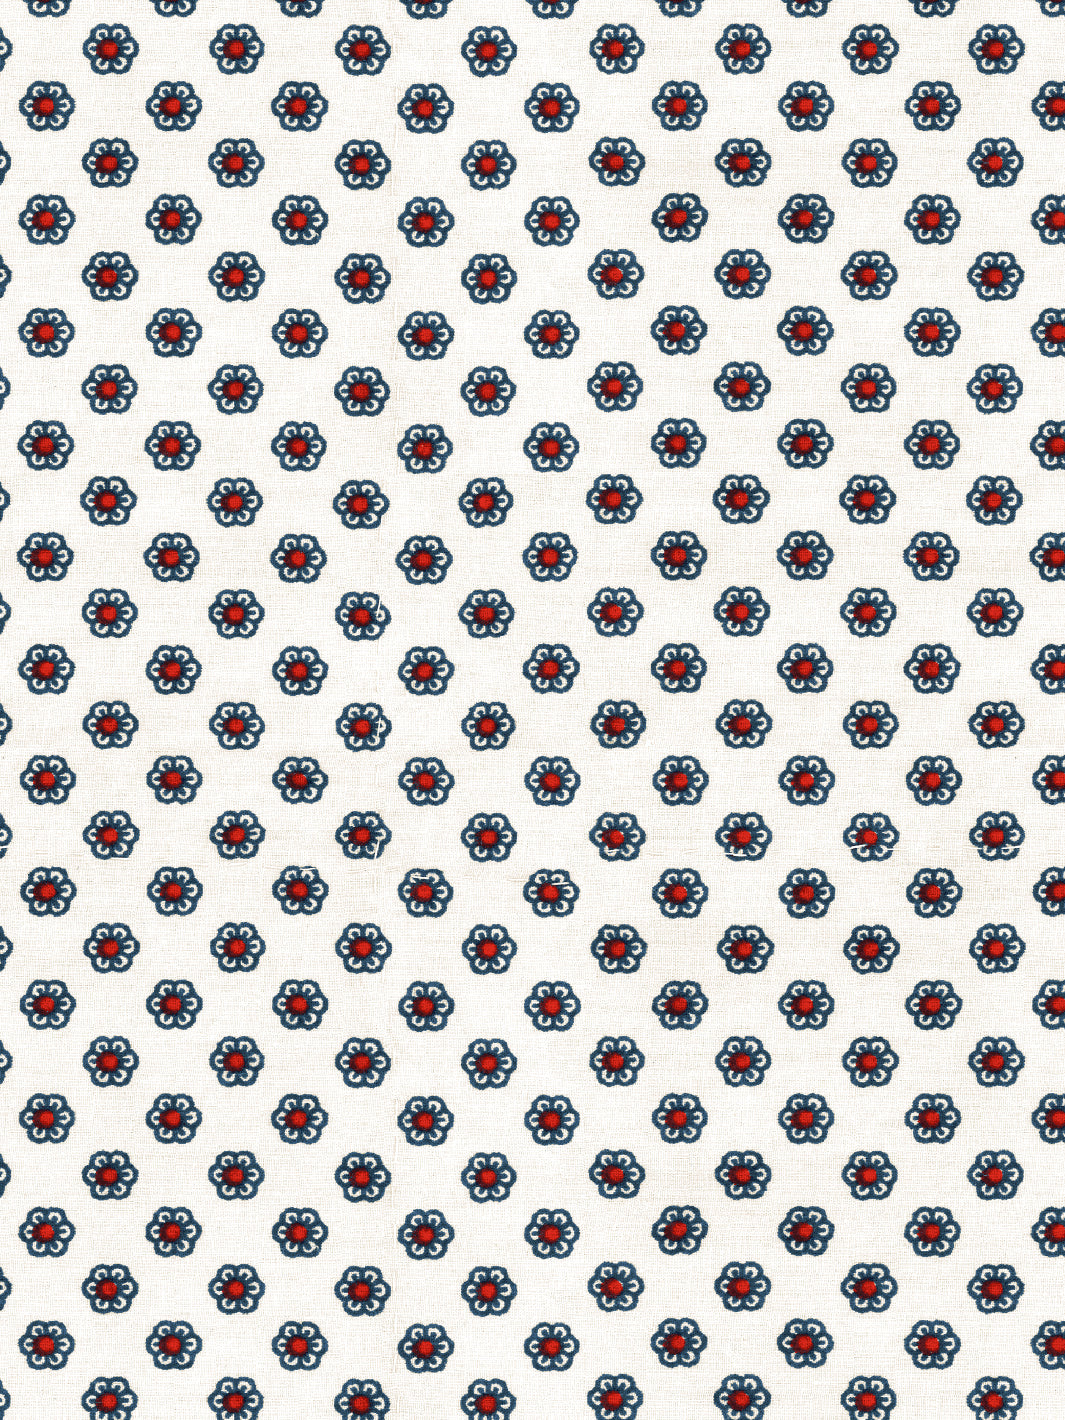 'Ditsy Flower' Wallpaper by Chris Benz - Blue Red